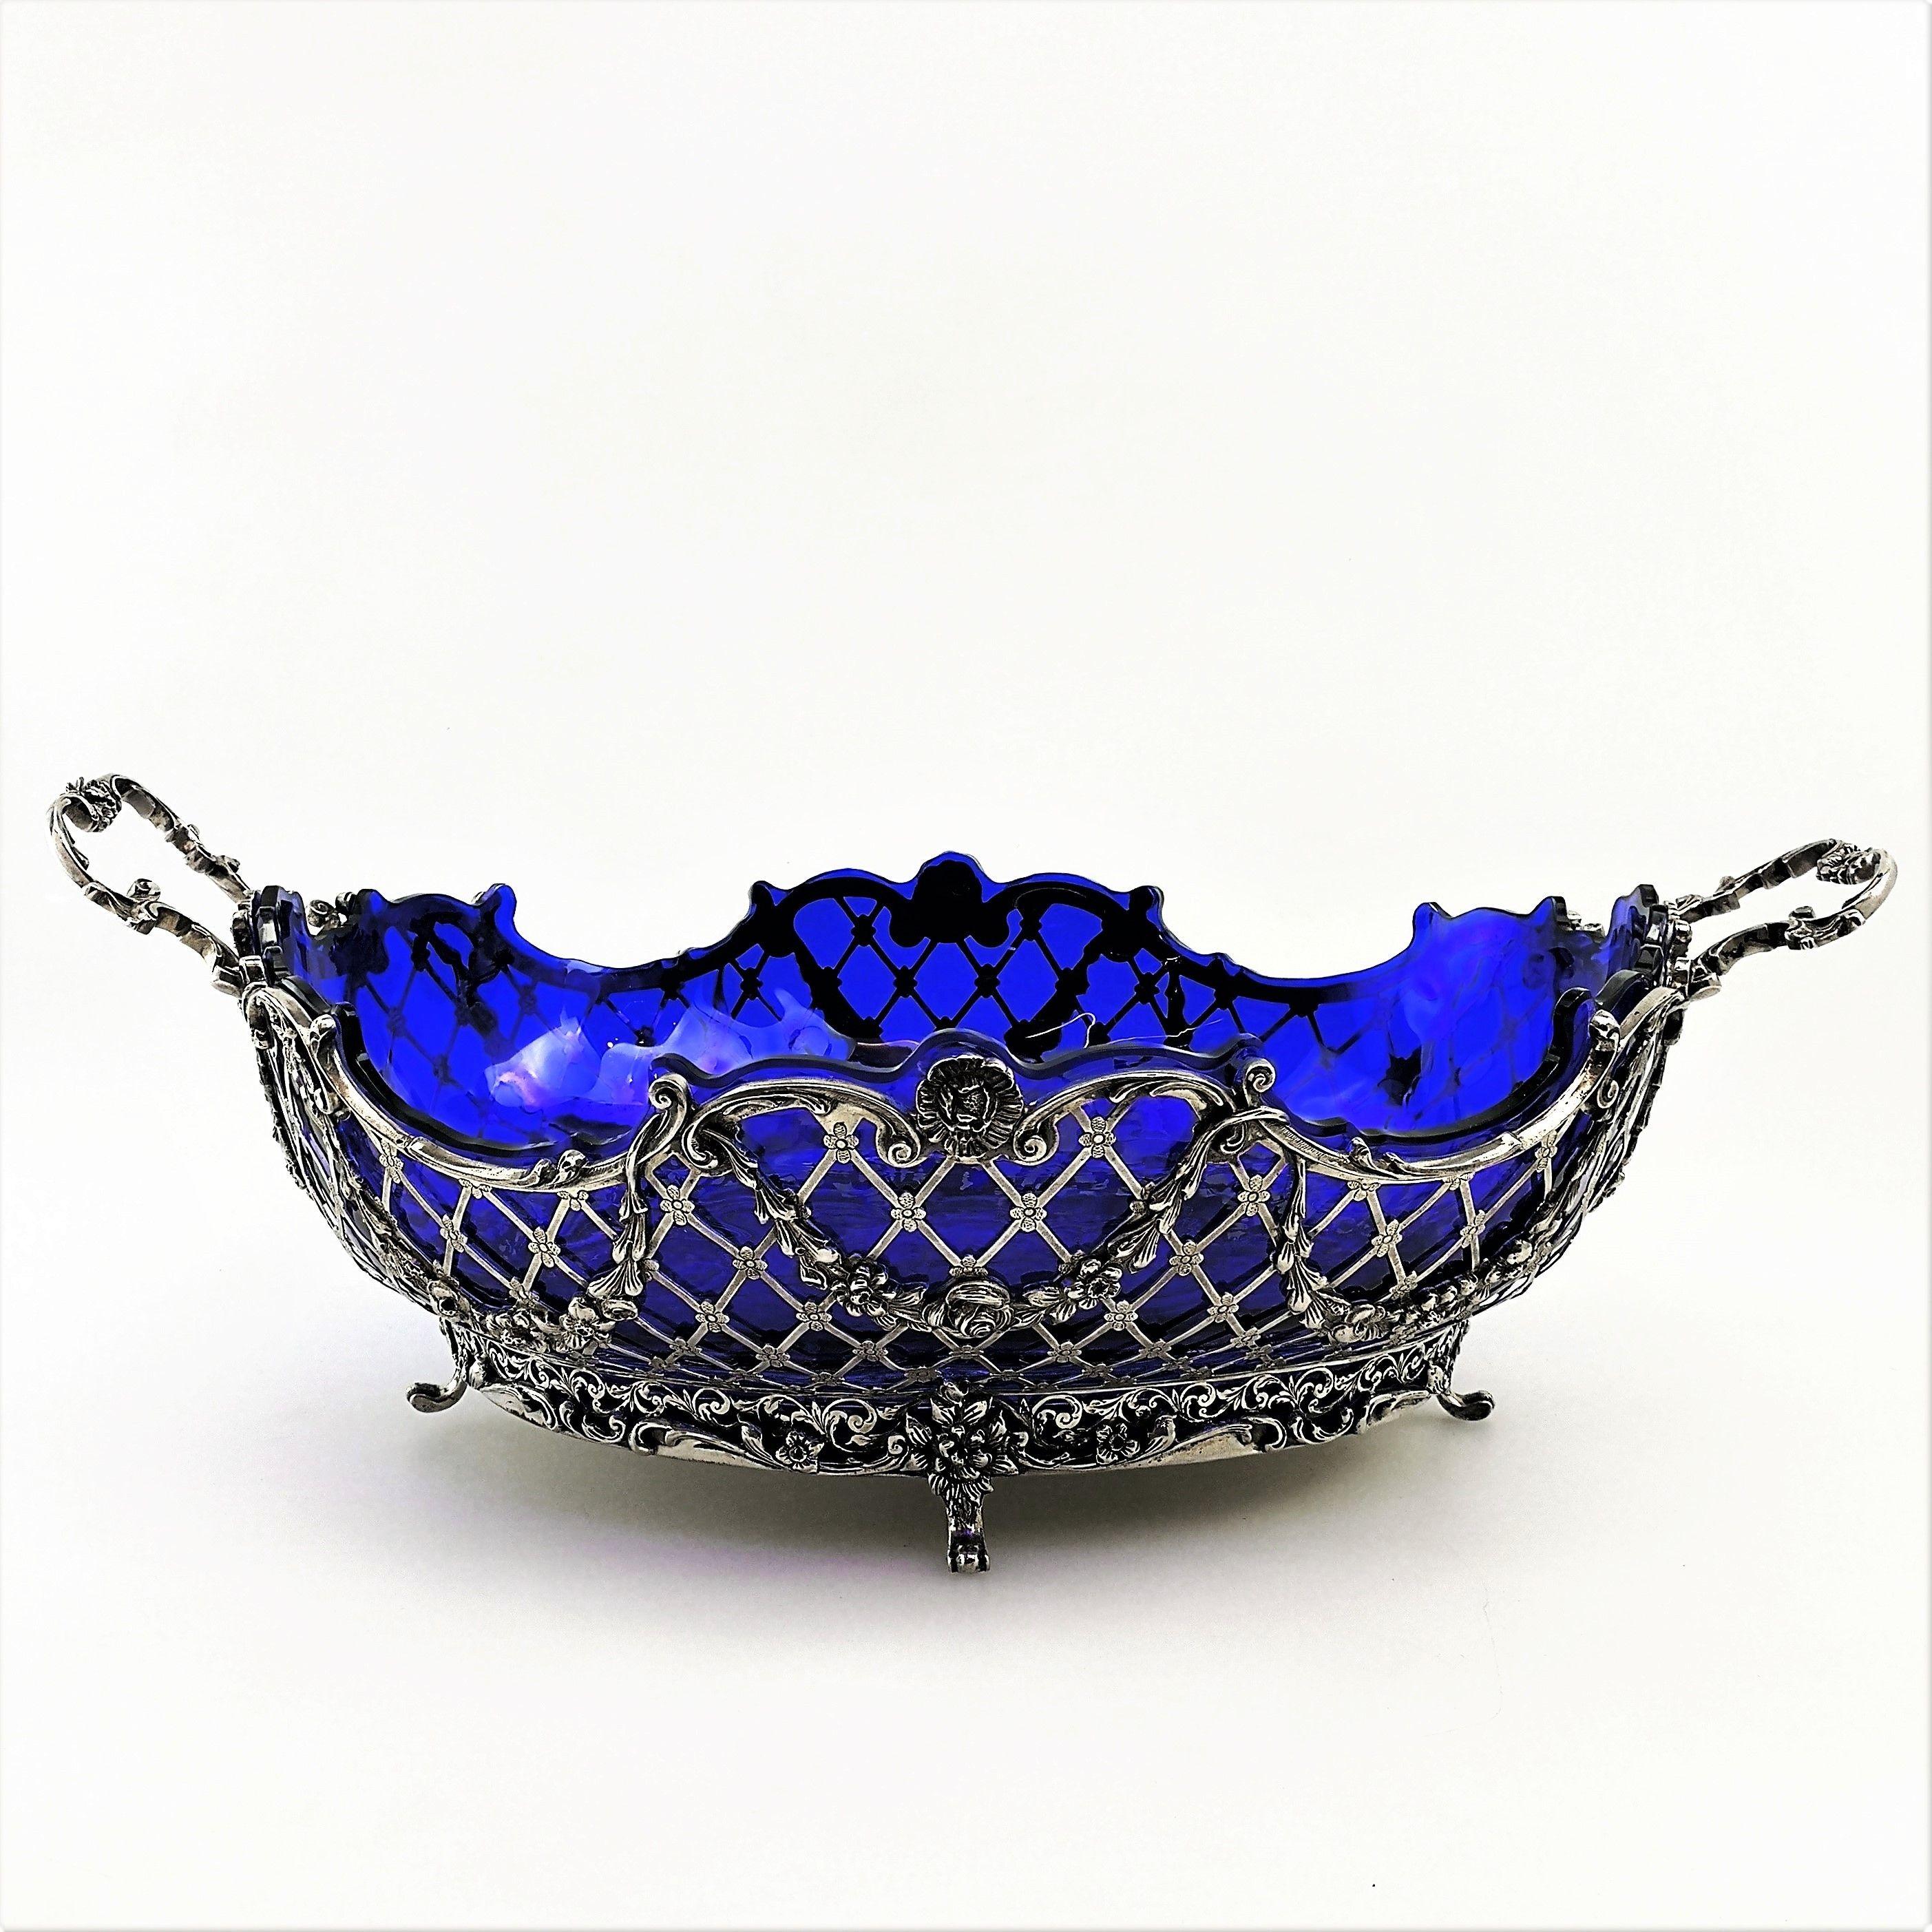 A magnificent Antique German Silver Basket with a deep blue glass liner. This Basket is of particularly large size and features gorgeous pierced and chased details including ornate floral swags along the body of the Basket. The Basket has two shaped